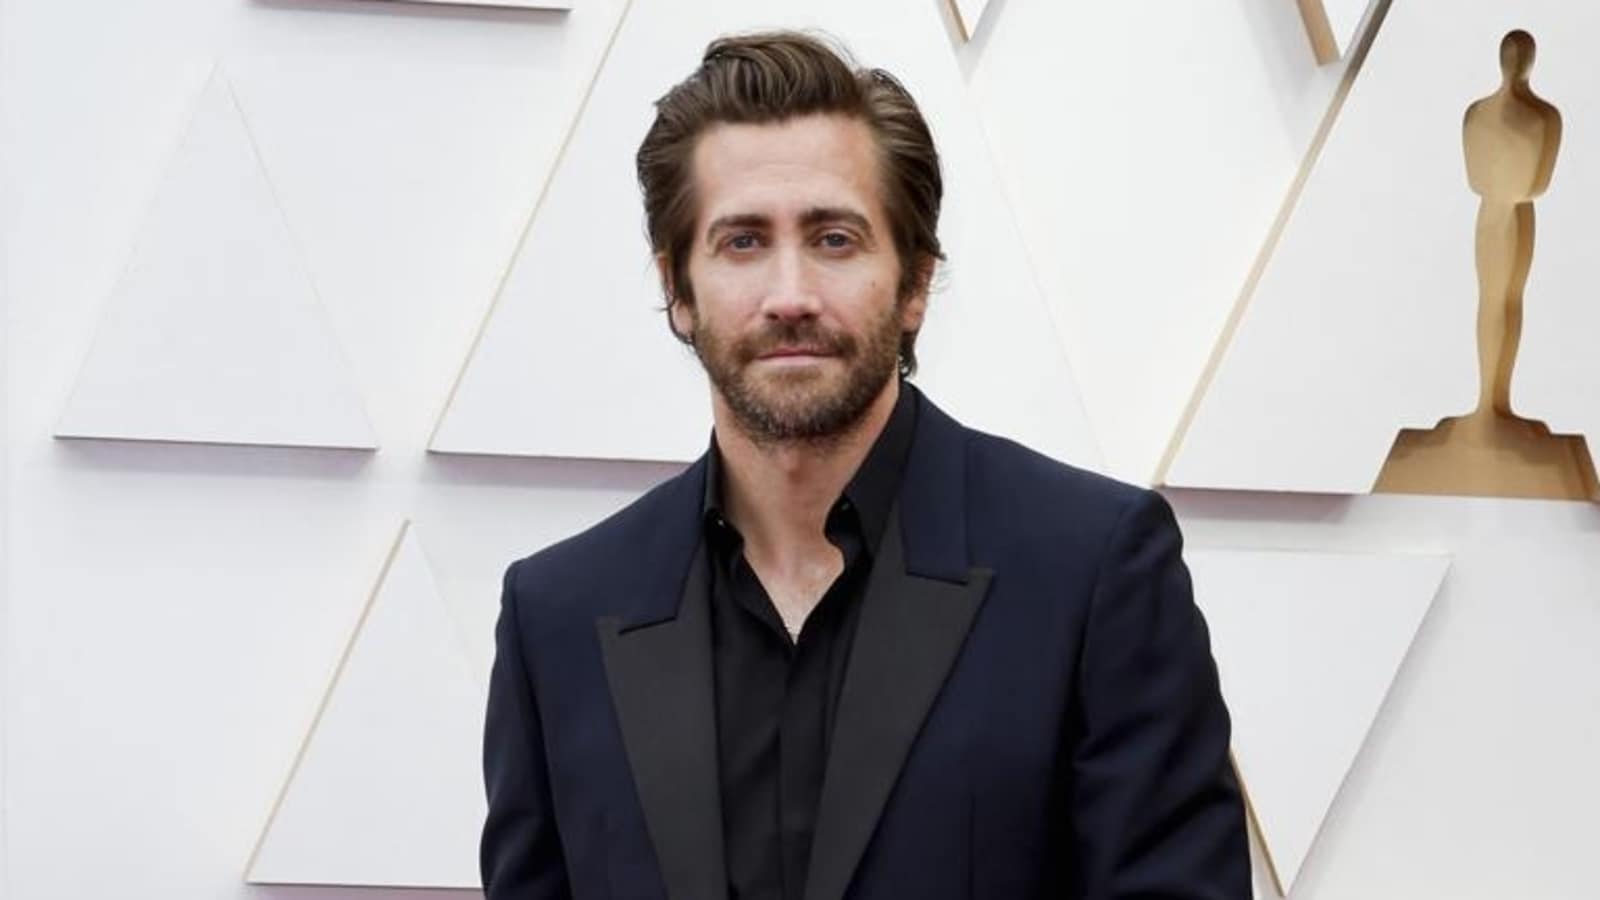 Jake Gyllenhaal on why he agreed to do Strange World: ‘I was so moved’ | Hollywood